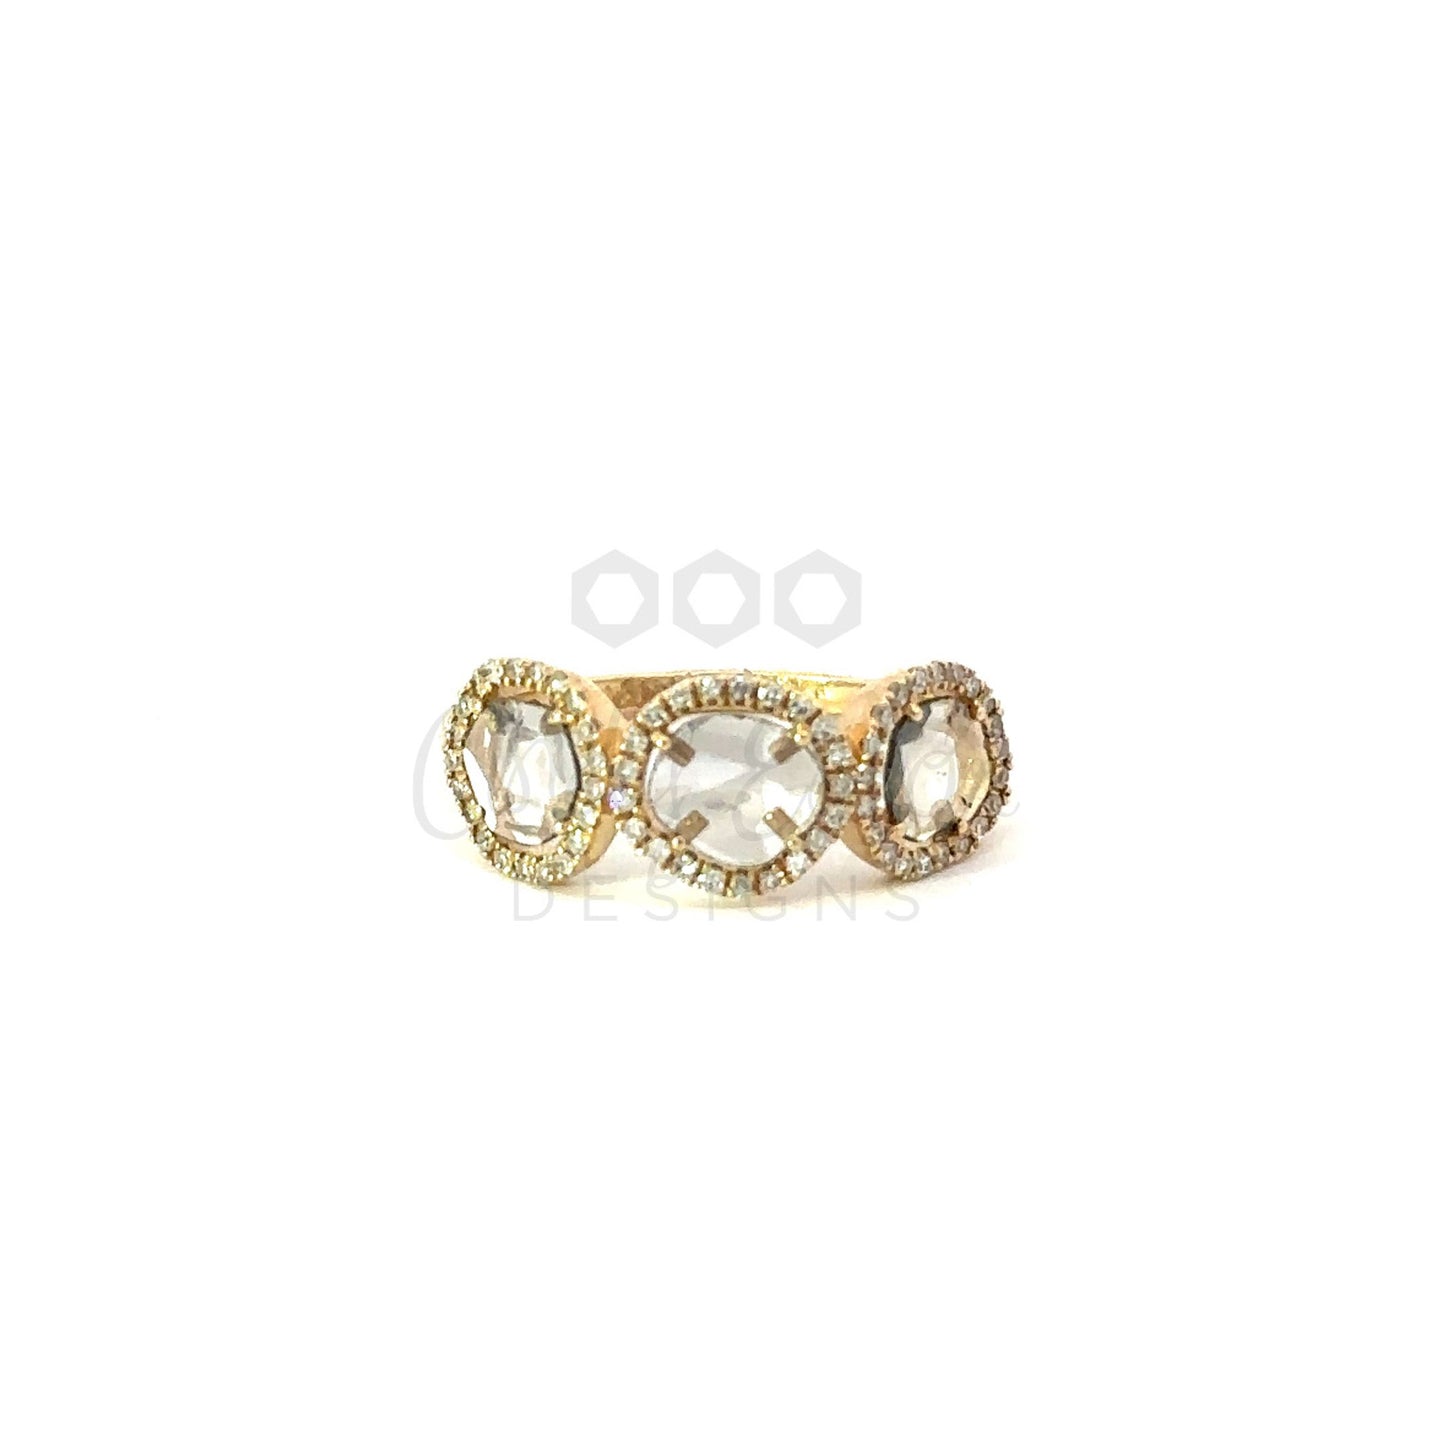 Triple Sliced Diamond Ring with Pave Border